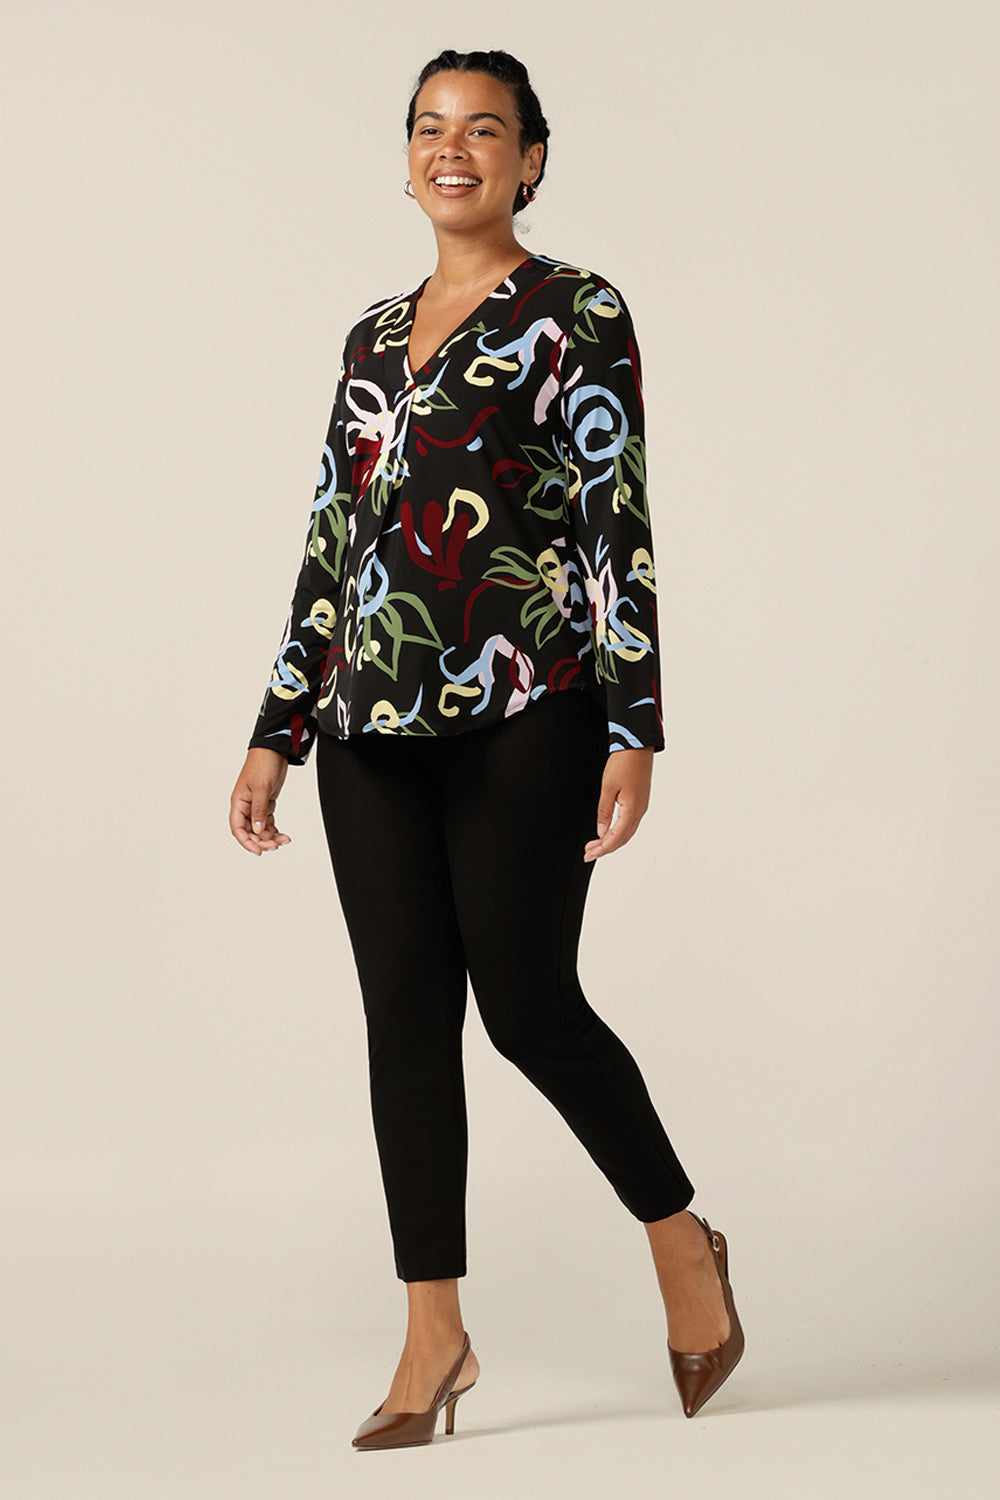 A size 12, curvy woman wears a V-neck jersey top with long sleeves and a shirttail hemline. Australian-made by Australia and New Zealand women's clothing label, L&F, this long sleeve top features an abstract print with a black base. This workwear top is worn with black trousers for easy corporate style.